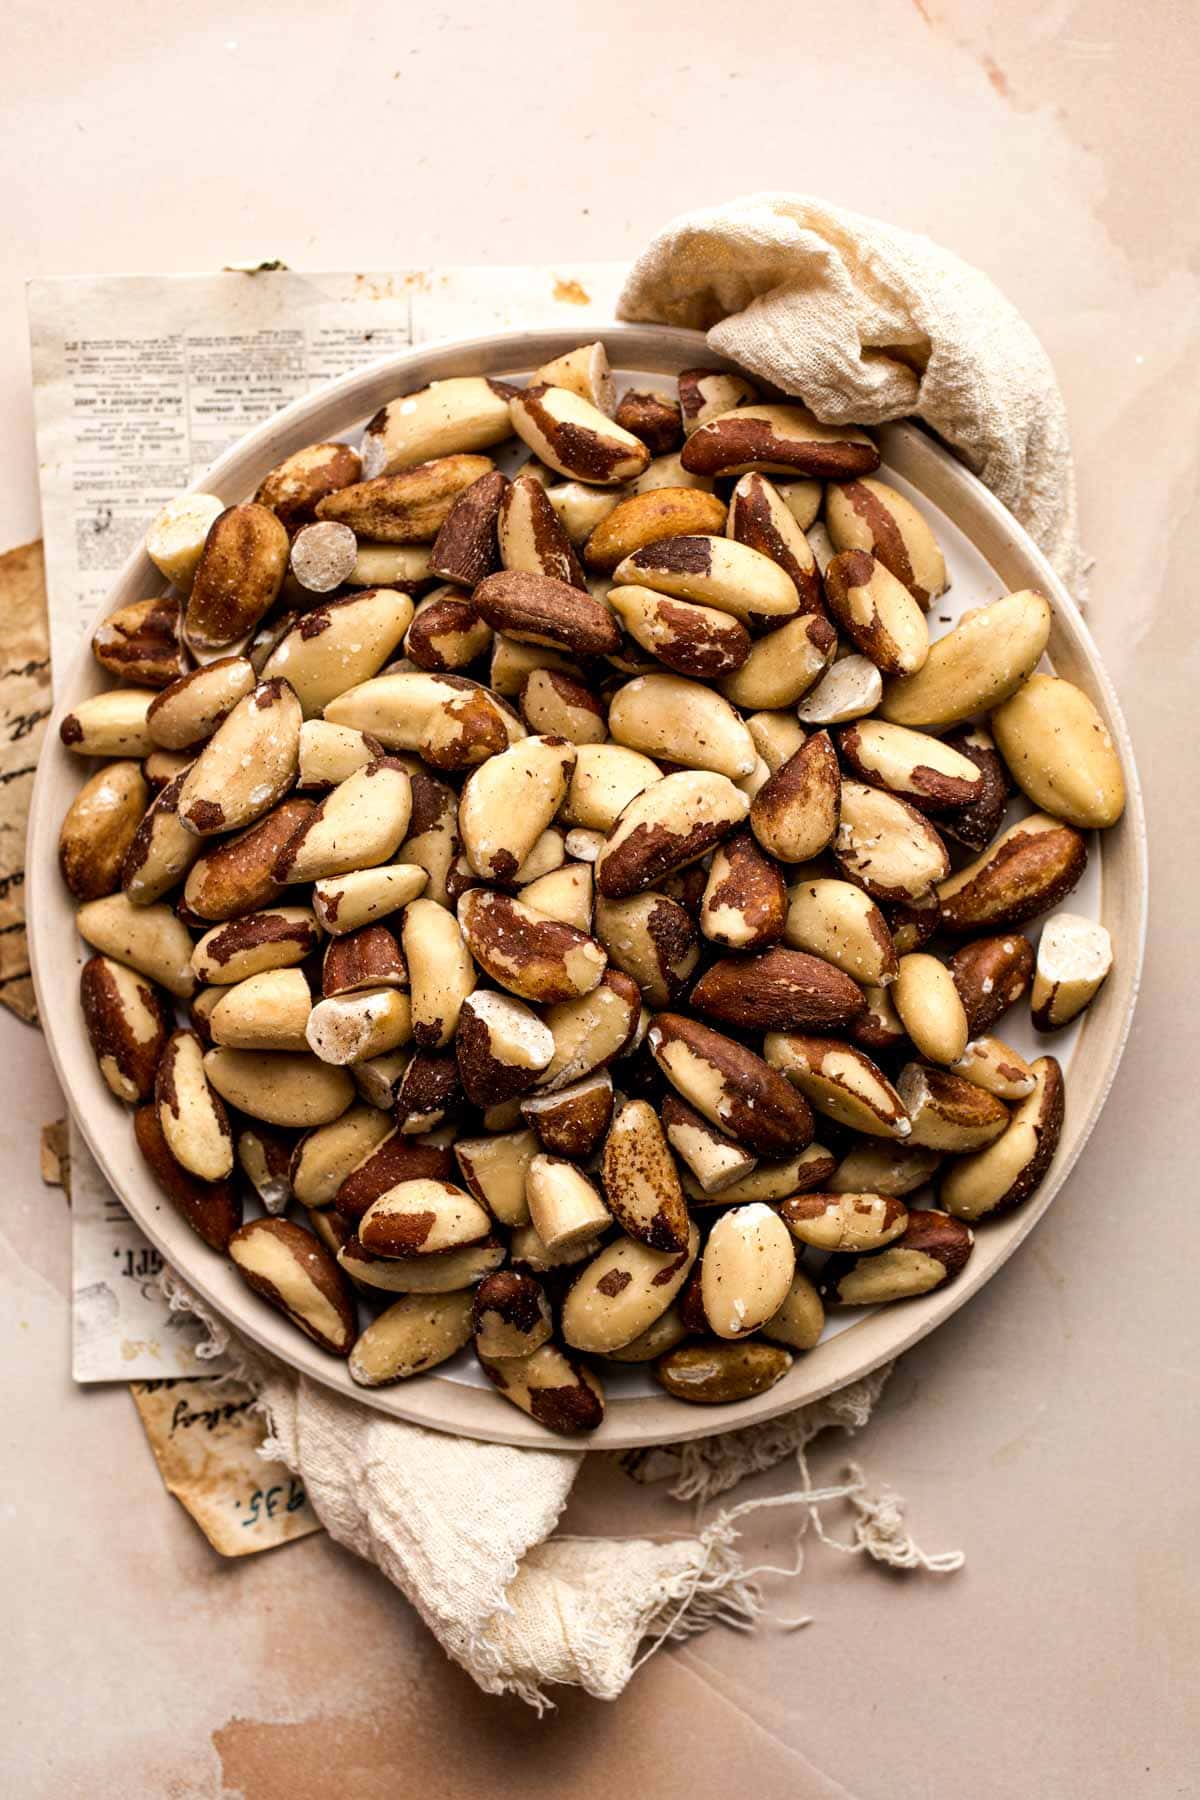 Whole brazil nuts on a plate.